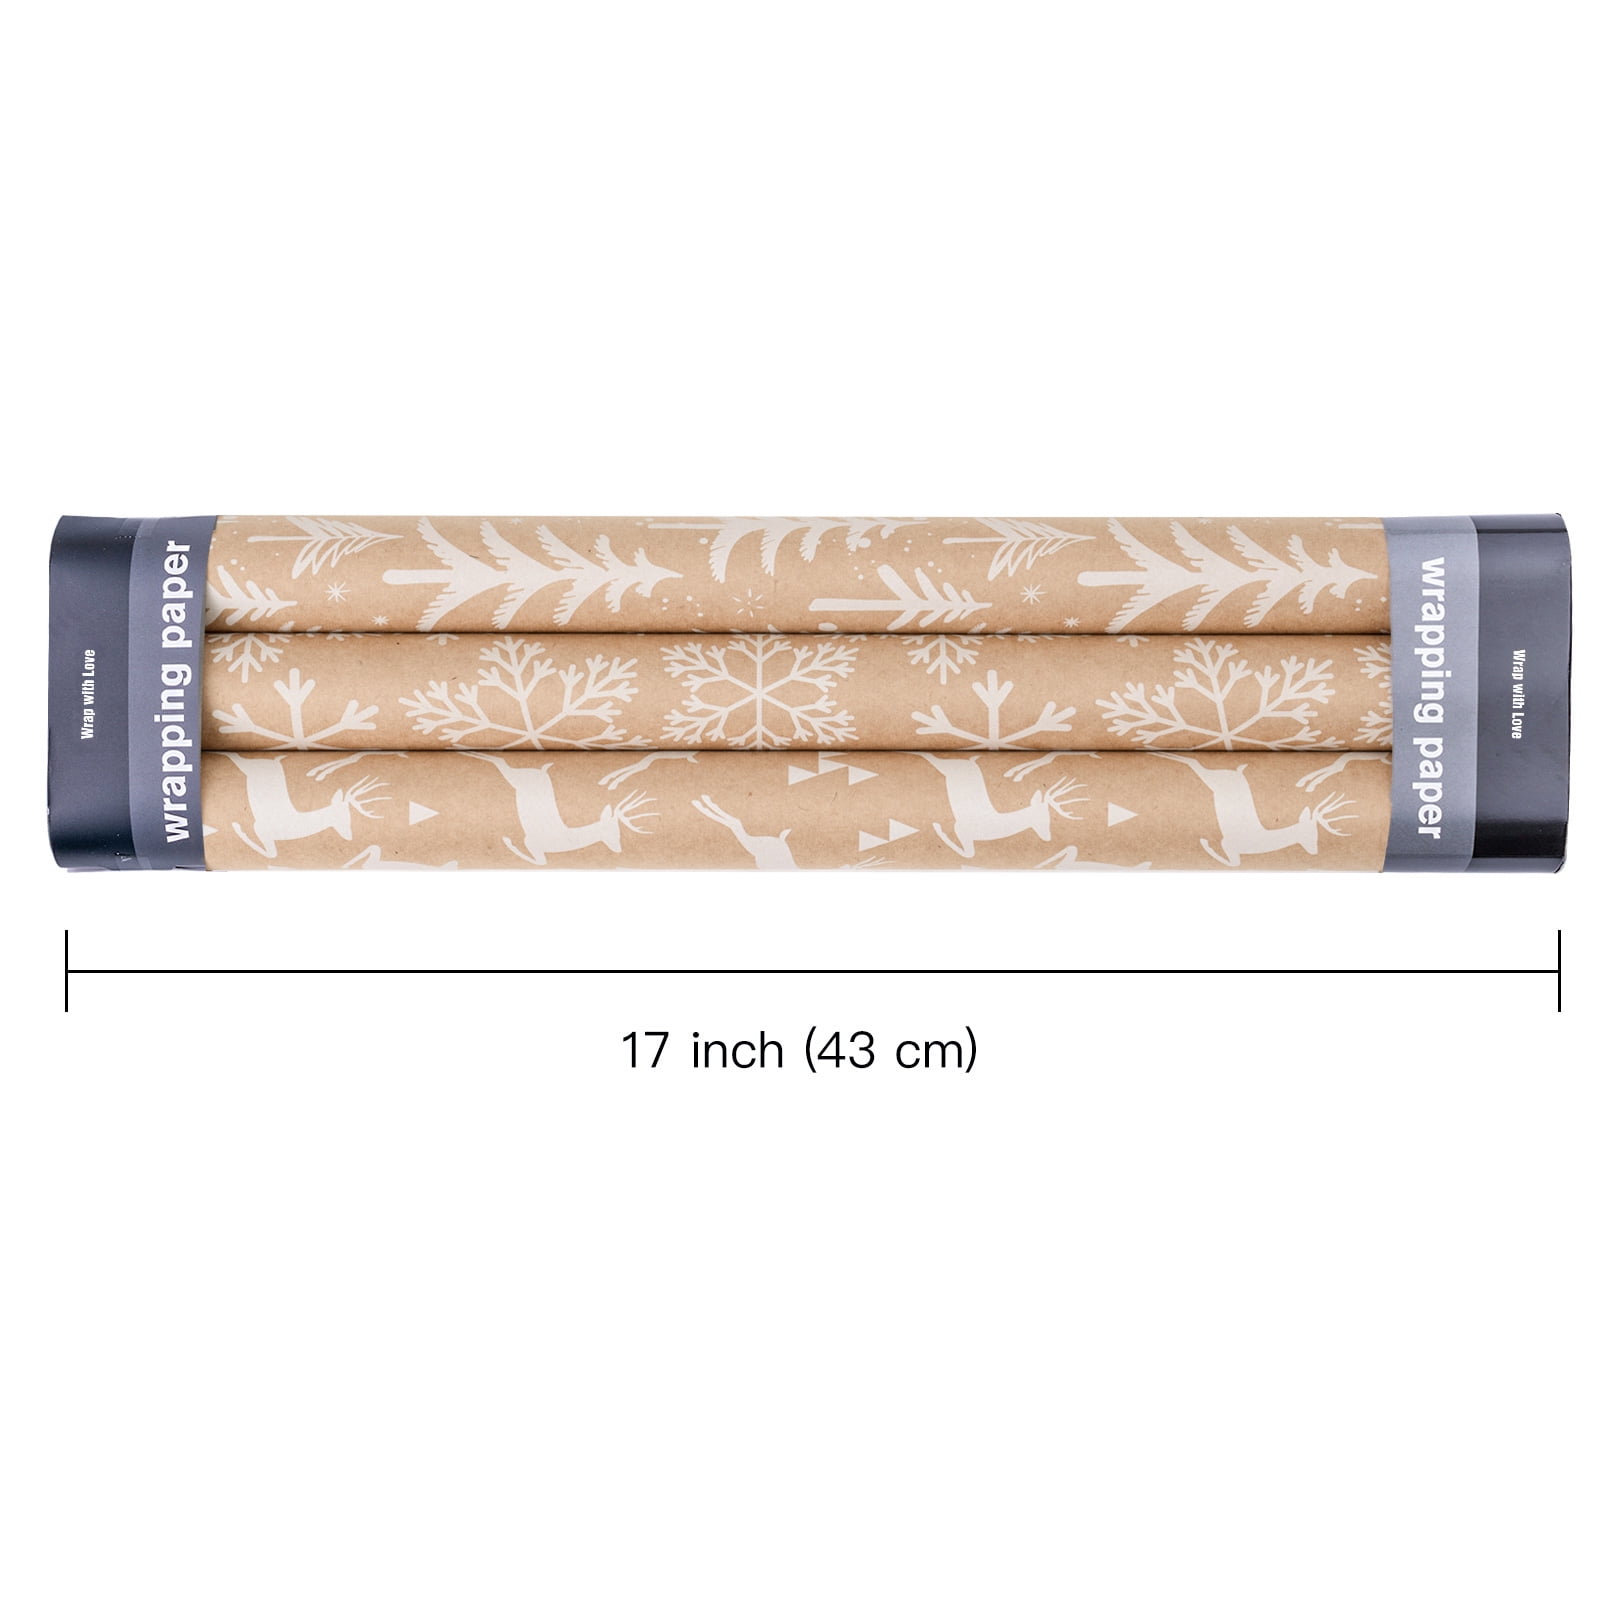 WRAPAHOLIC Easter Wrapping Paper Roll - Mini Roll - 3 Rolls - 17 Inch X 120  Inch Per Roll - Easter Rabbit/Plaid/Floral for Holiday, Party, Celebration